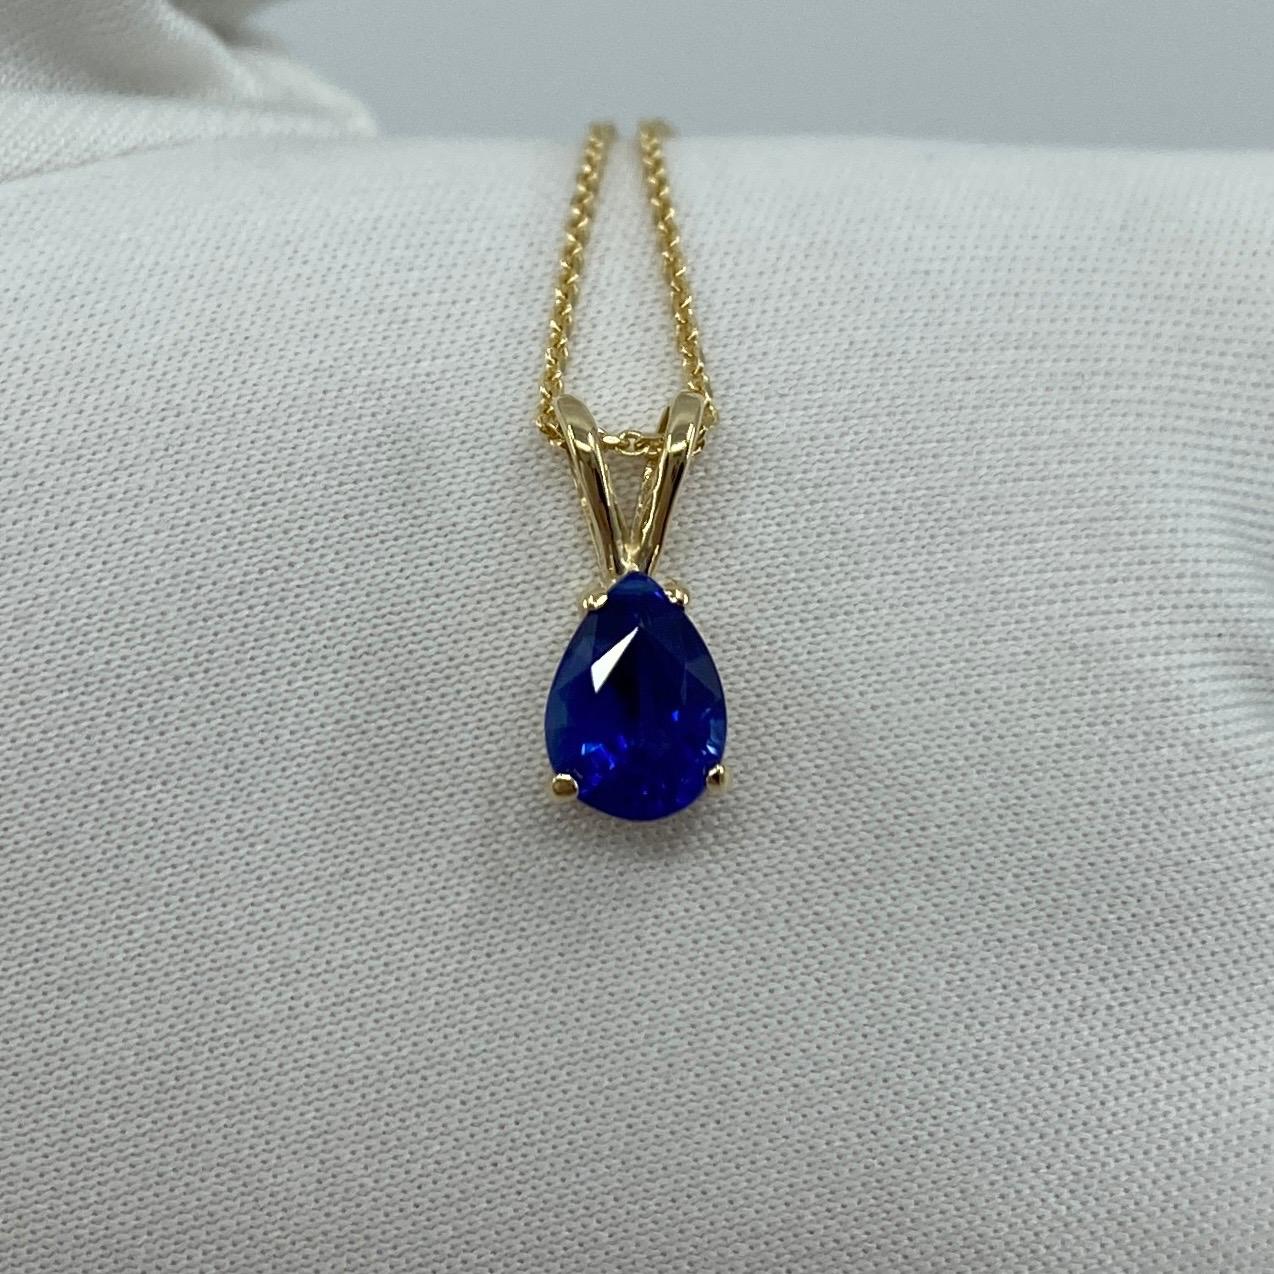 Fine Cornflower Blue Ceylon Sapphire Solitaire Pendant.

1.05 Carat Ceylon sapphire with a stunning rich cornflower blue colour and an excellent pear/teardrop cut. Also has good clarity, clean stone with some small natural inclusions visible when